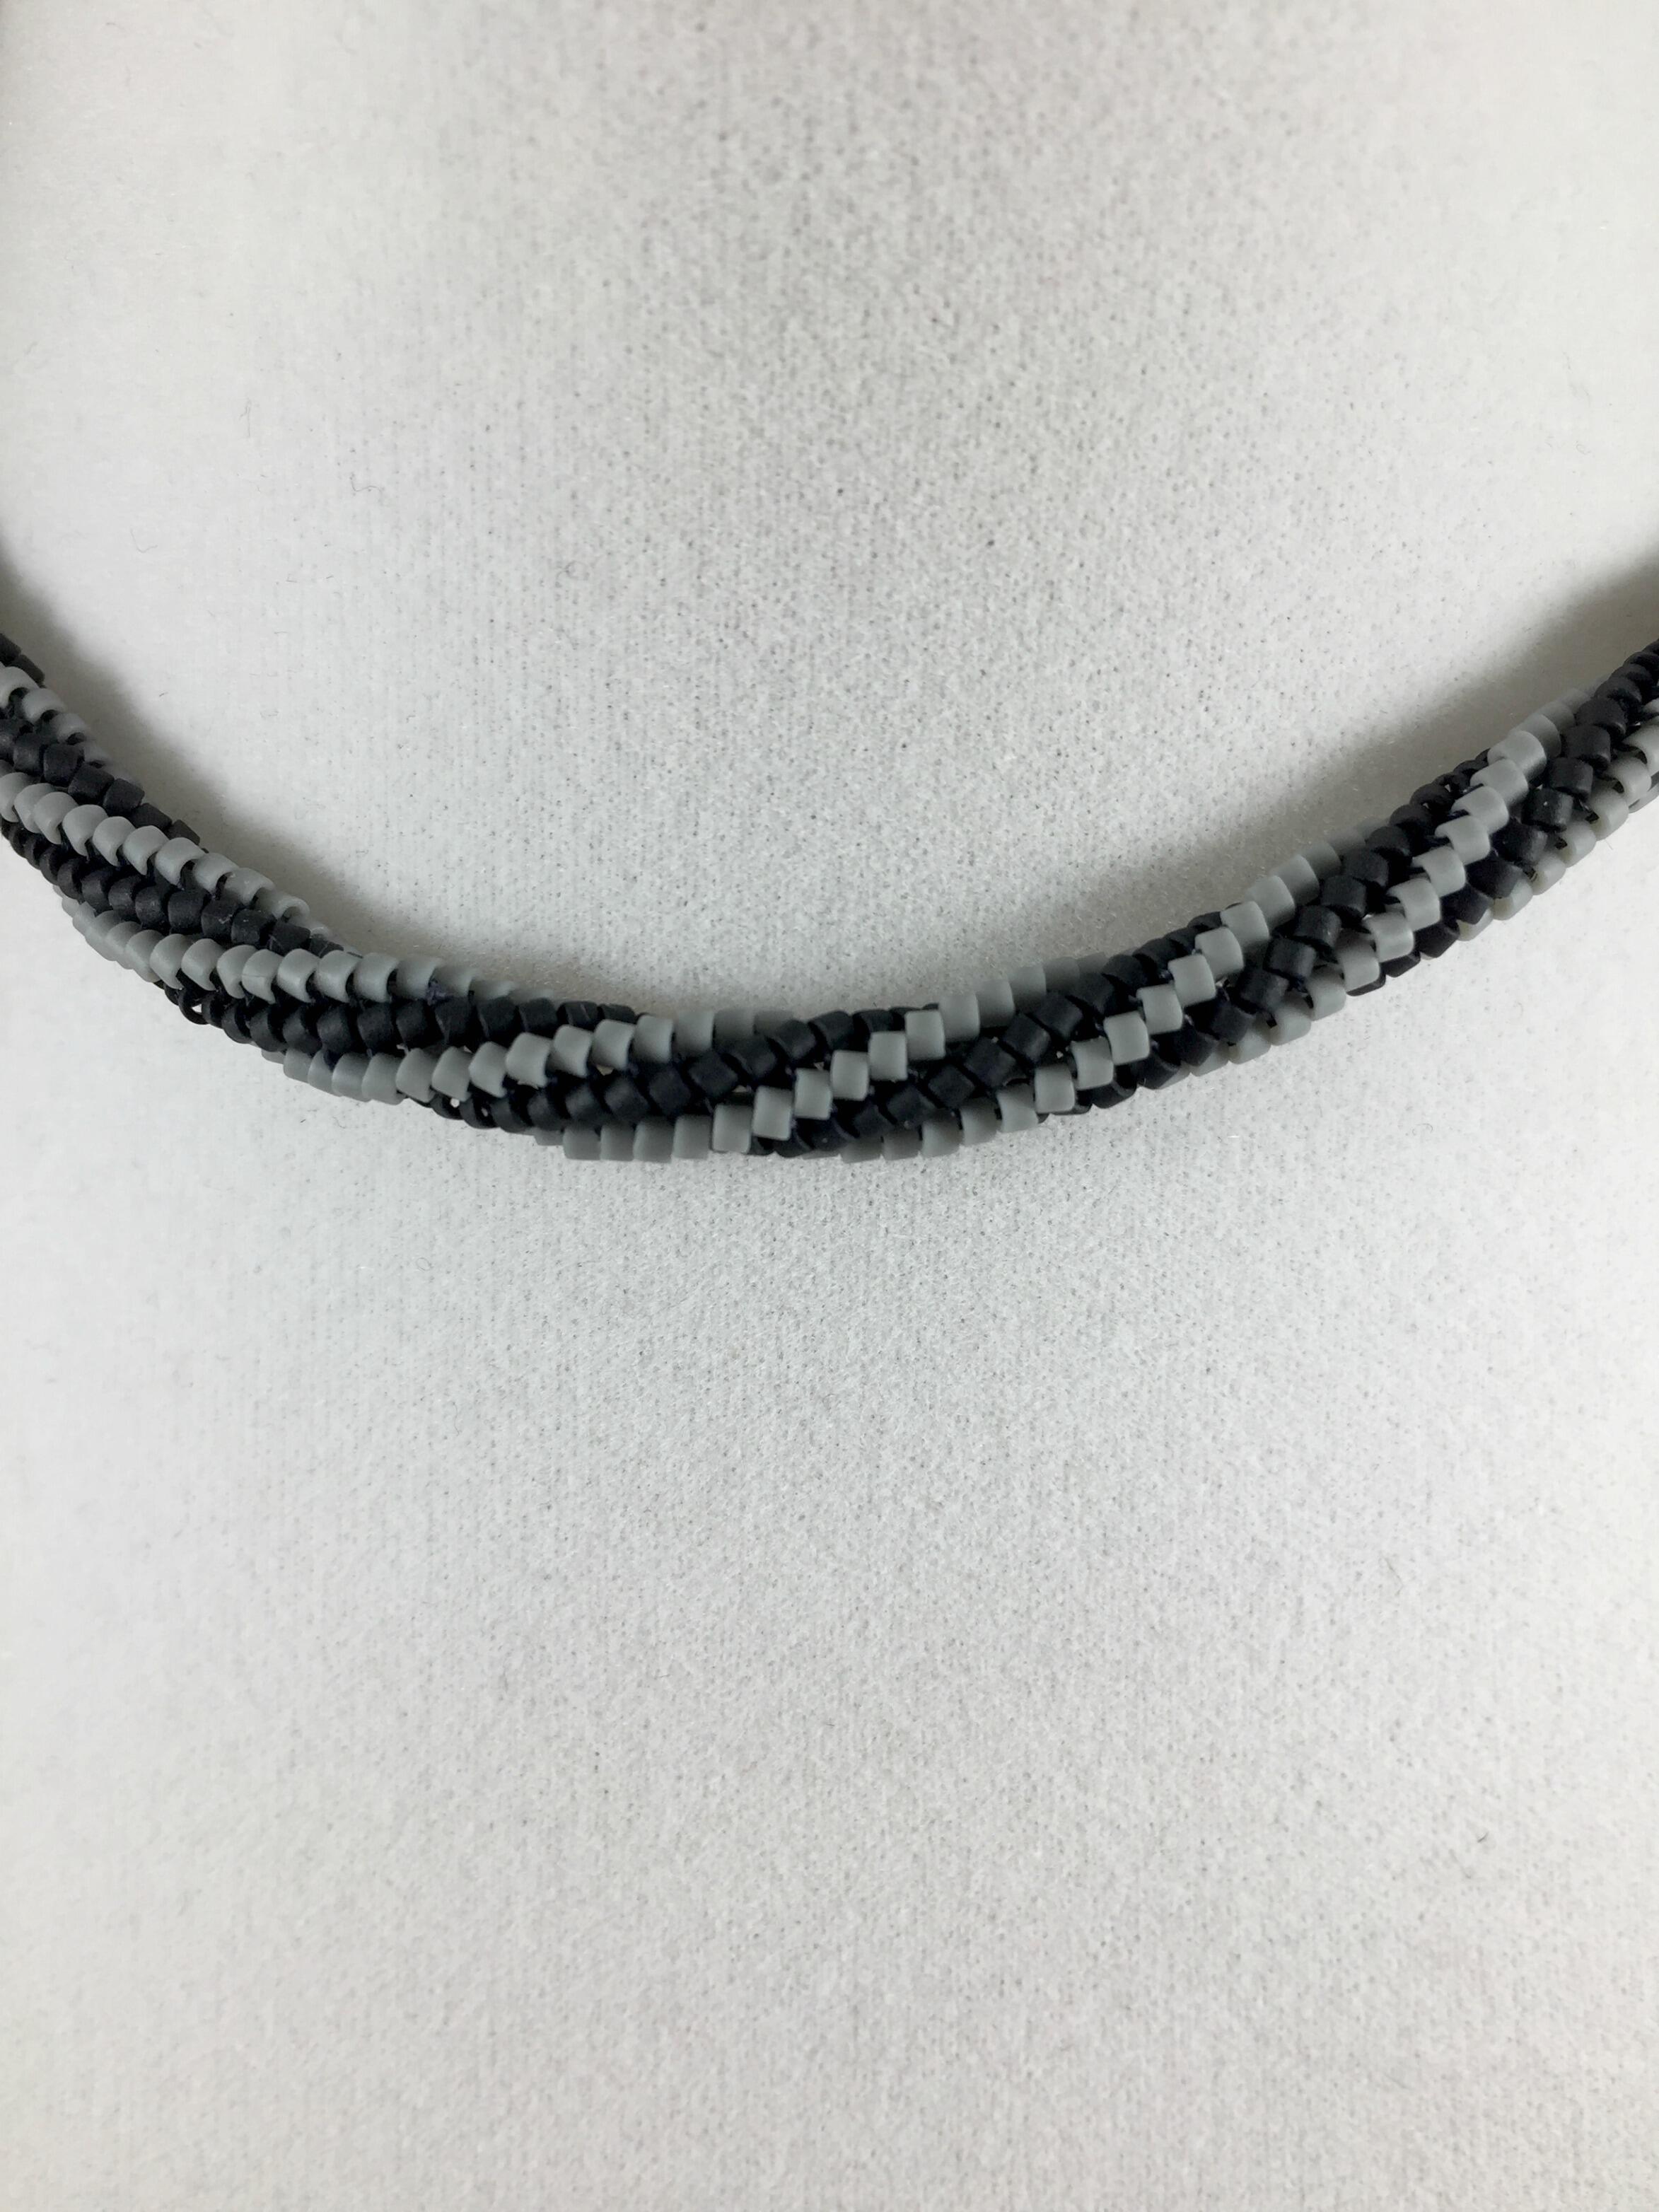 Detail image of hand woven black and grey tubular Herringbone beaded necklace 